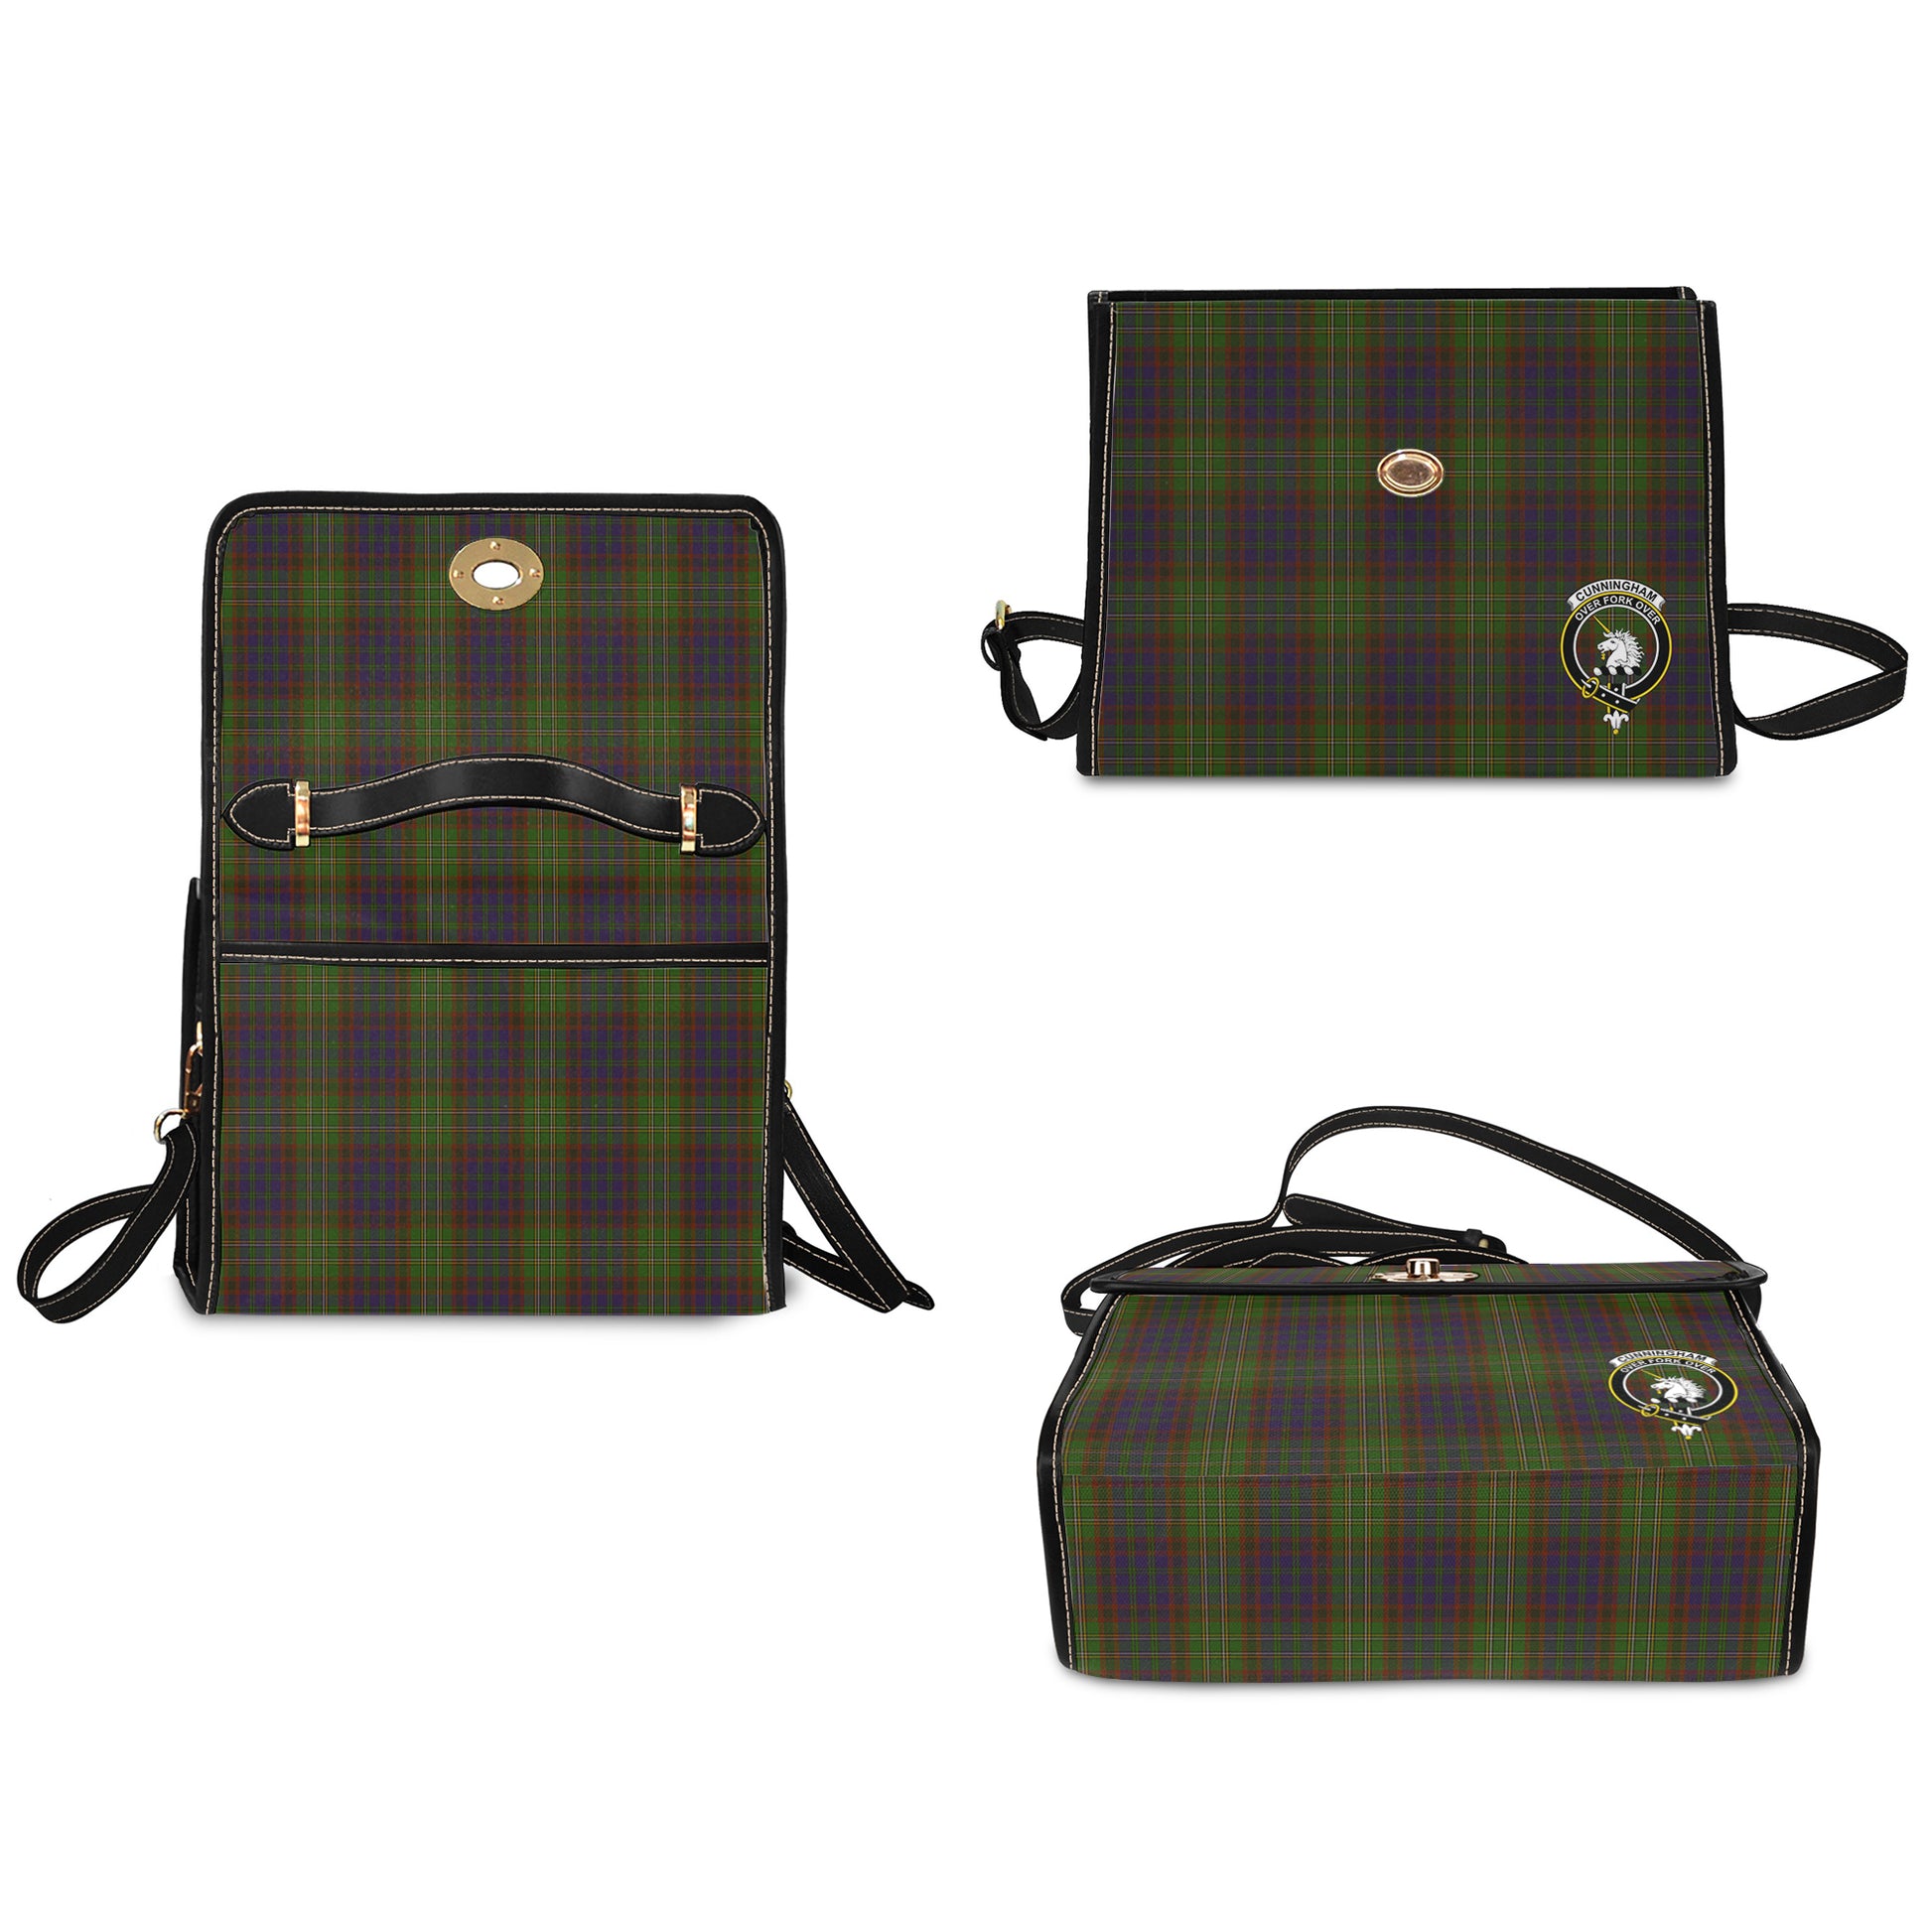 cunningham-hunting-modern-tartan-leather-strap-waterproof-canvas-bag-with-family-crest